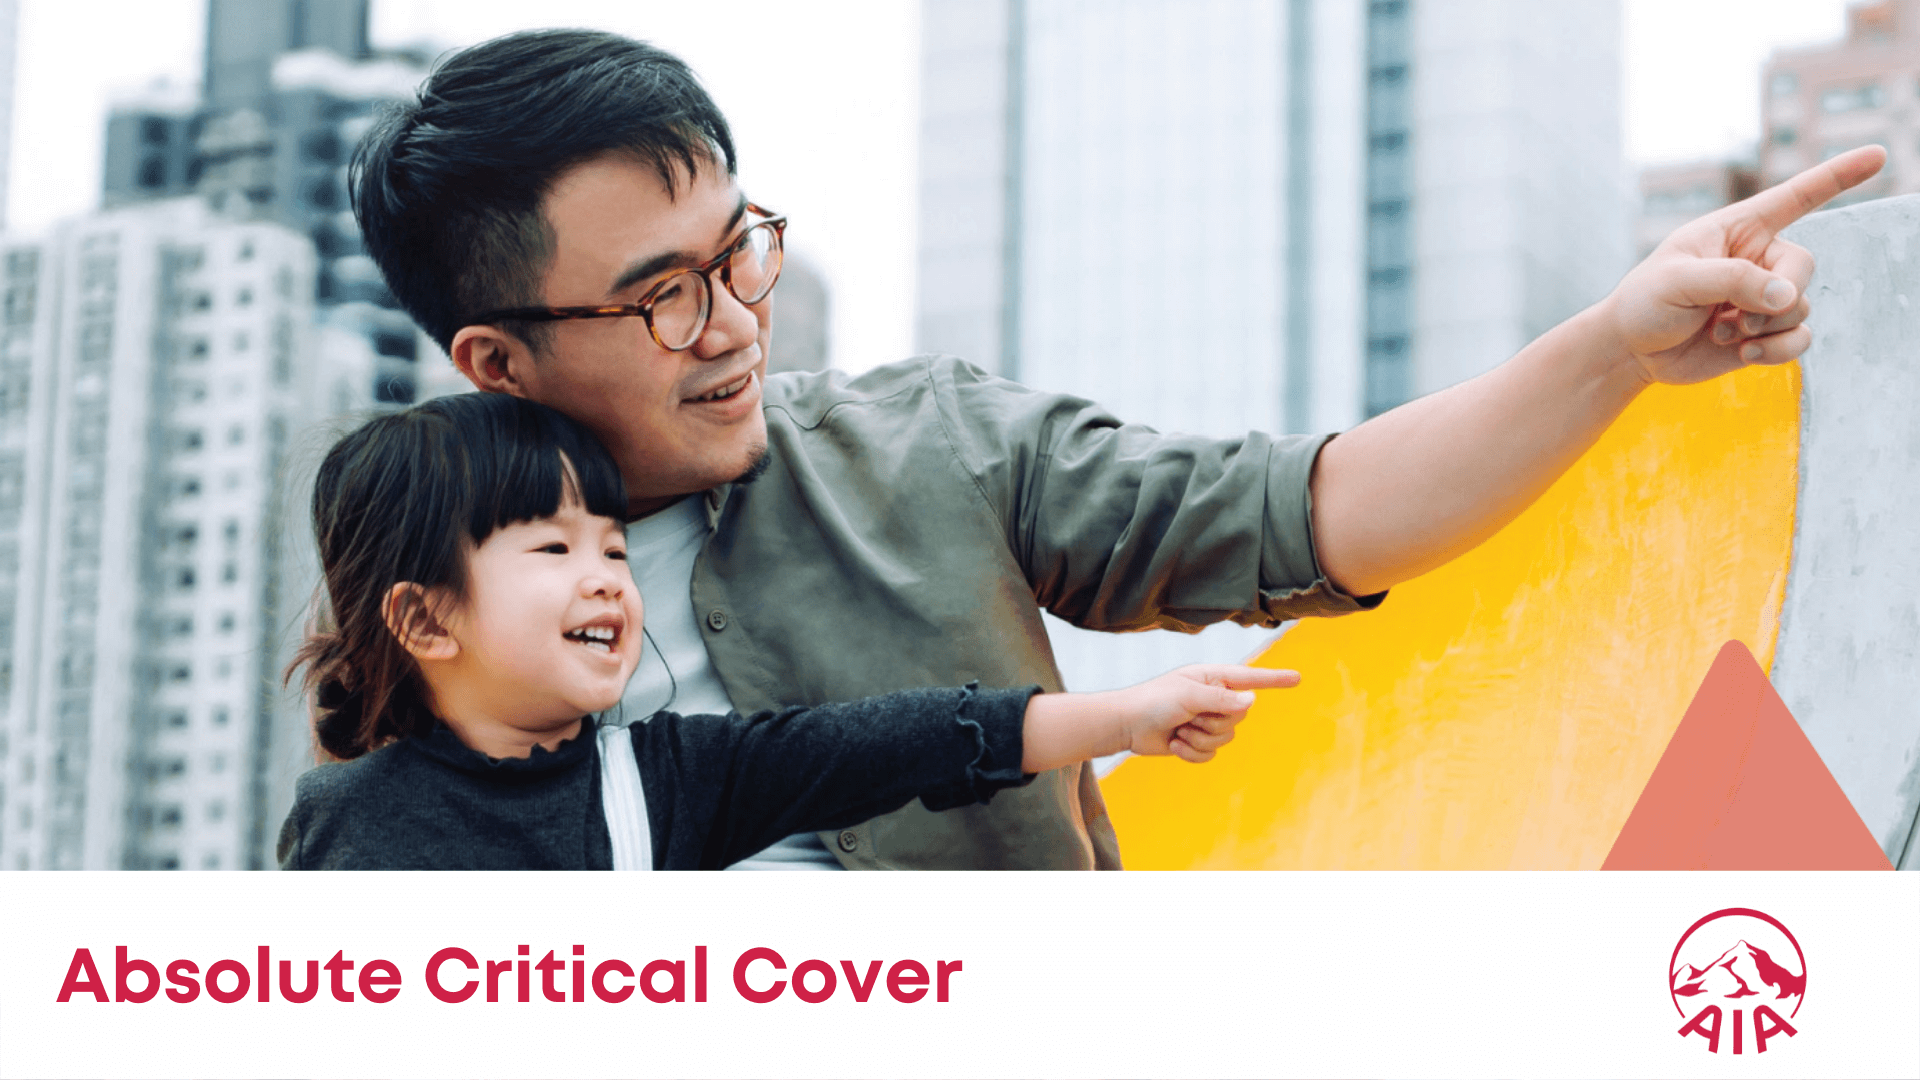 AIA Absolute Critical Cover